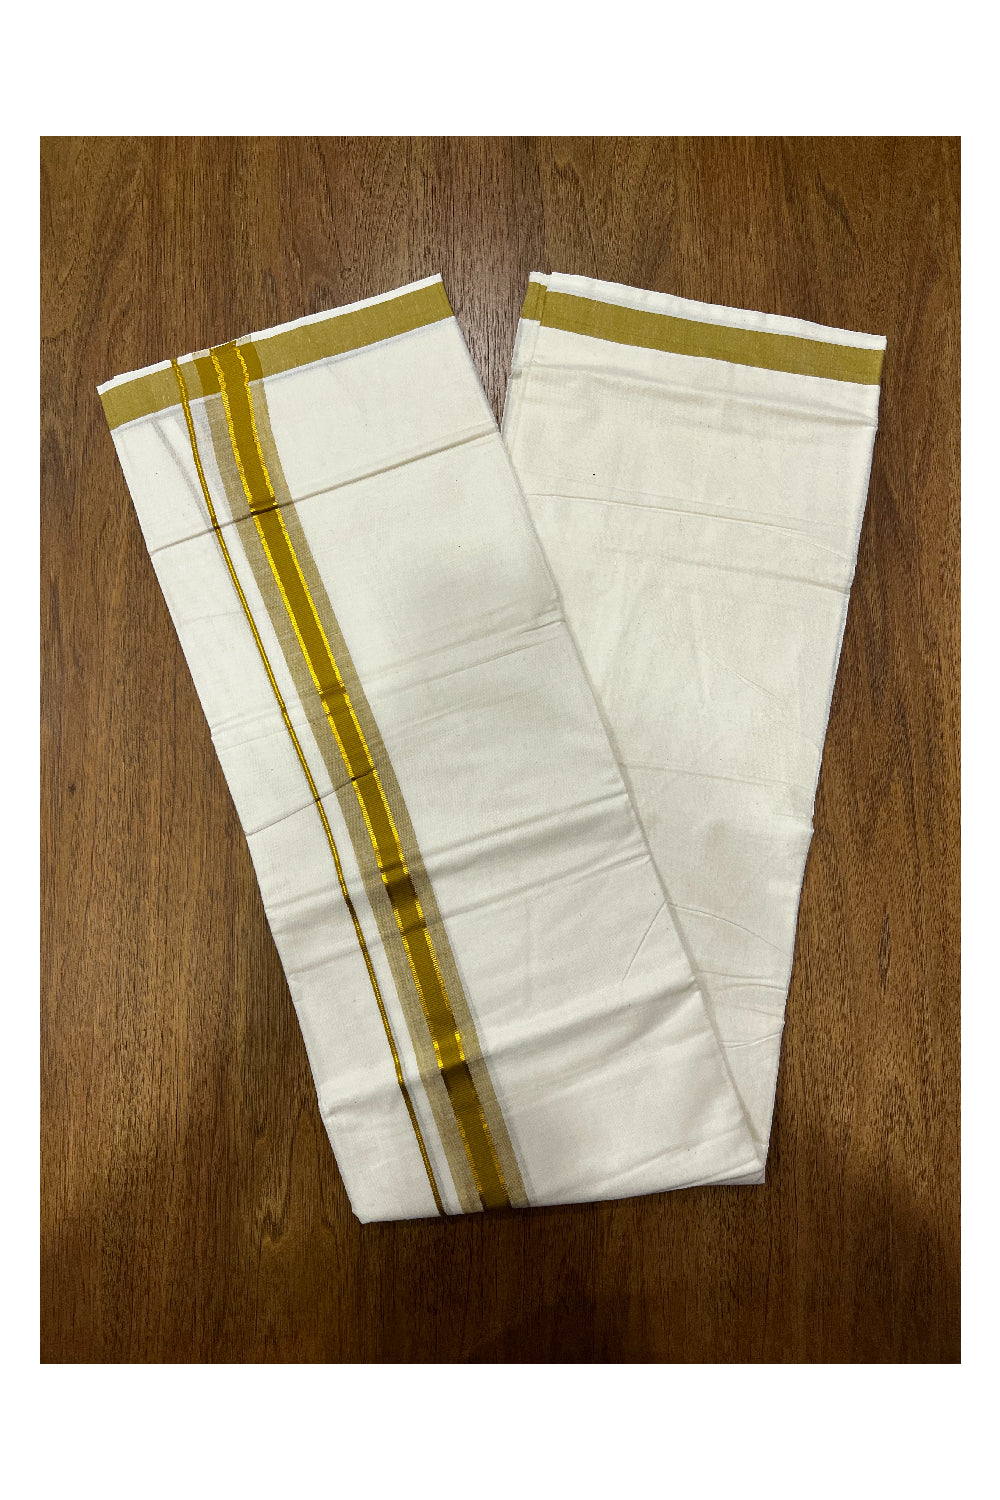 Southloom Onam 2022 Off-White Double Mundu with Kasavu and Brown Border (South Indian Dhoti)